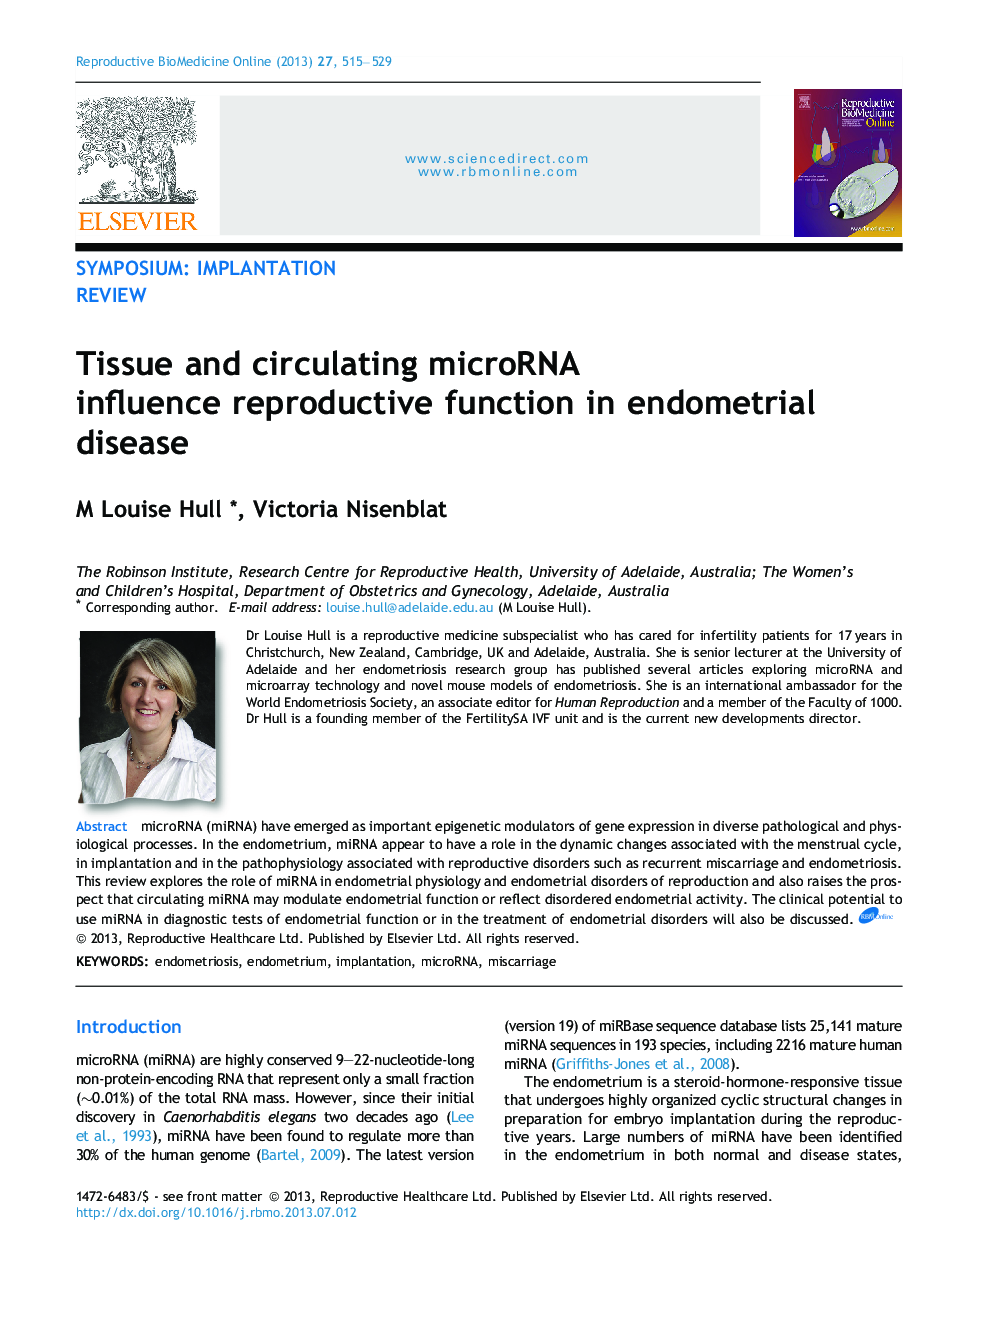 Tissue and circulating microRNA influence reproductive function in endometrial disease 